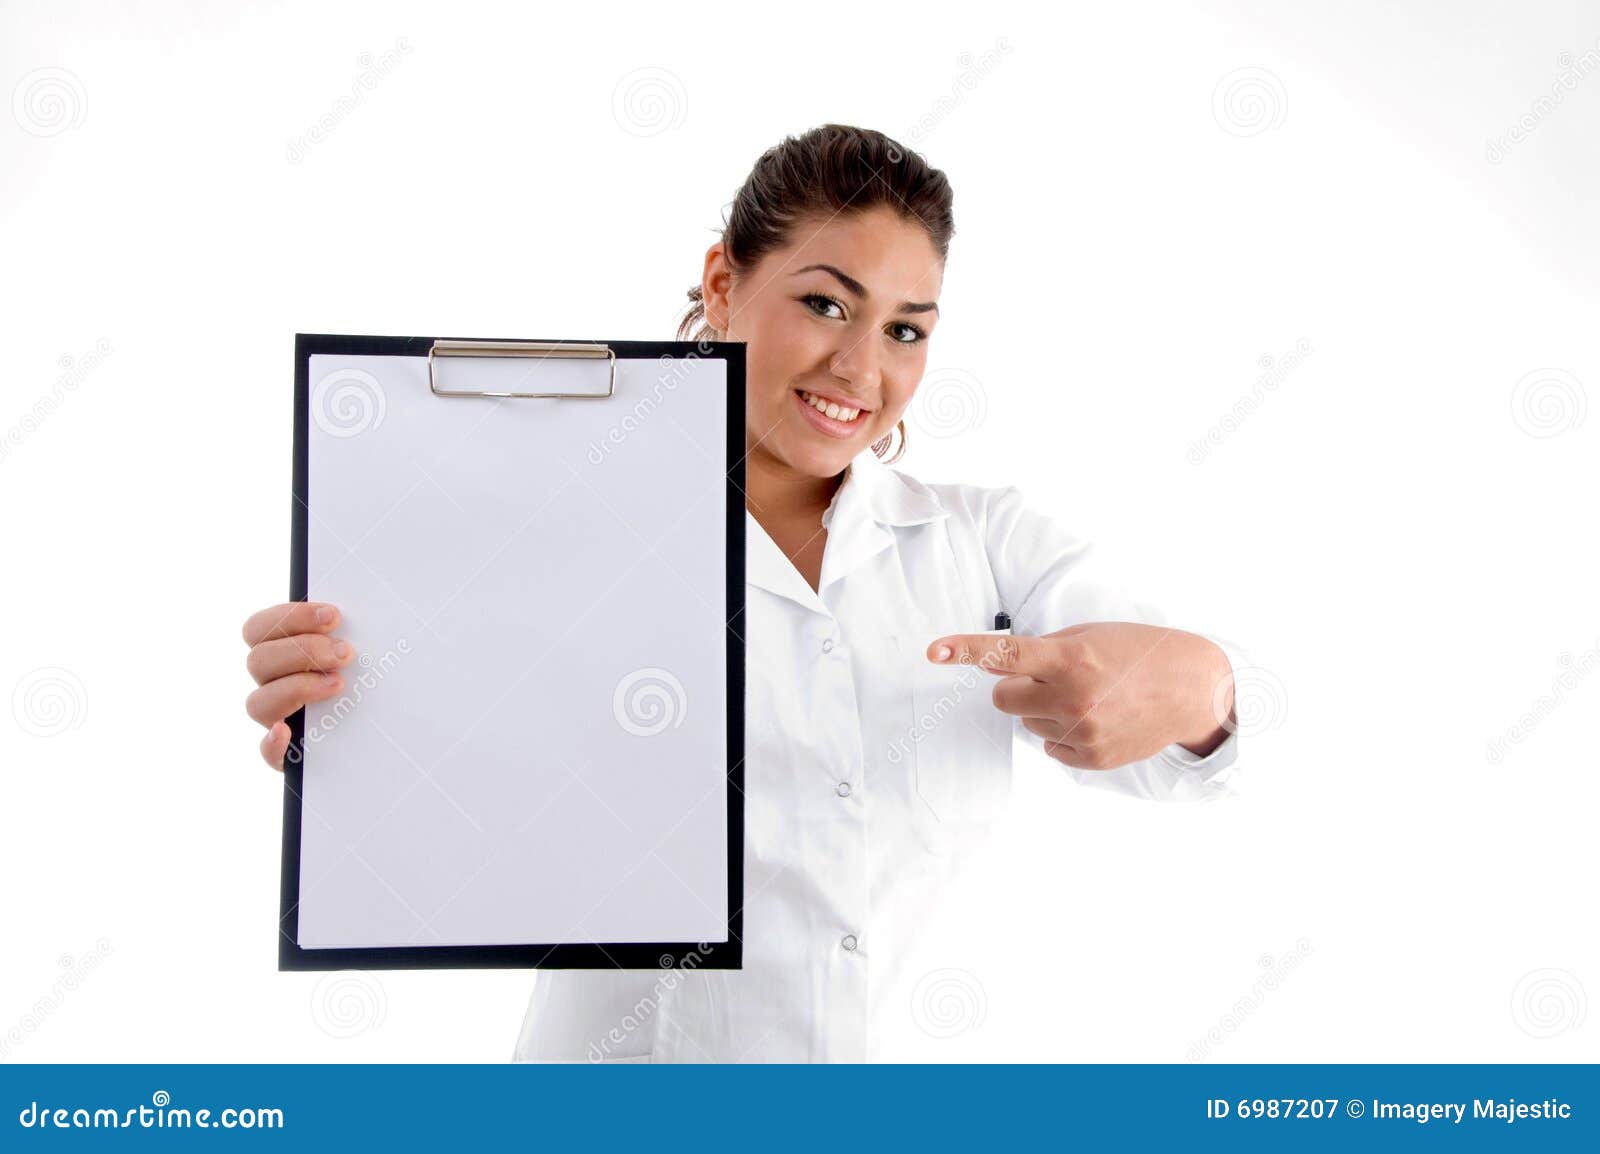 smiling doctor indicating the writing board